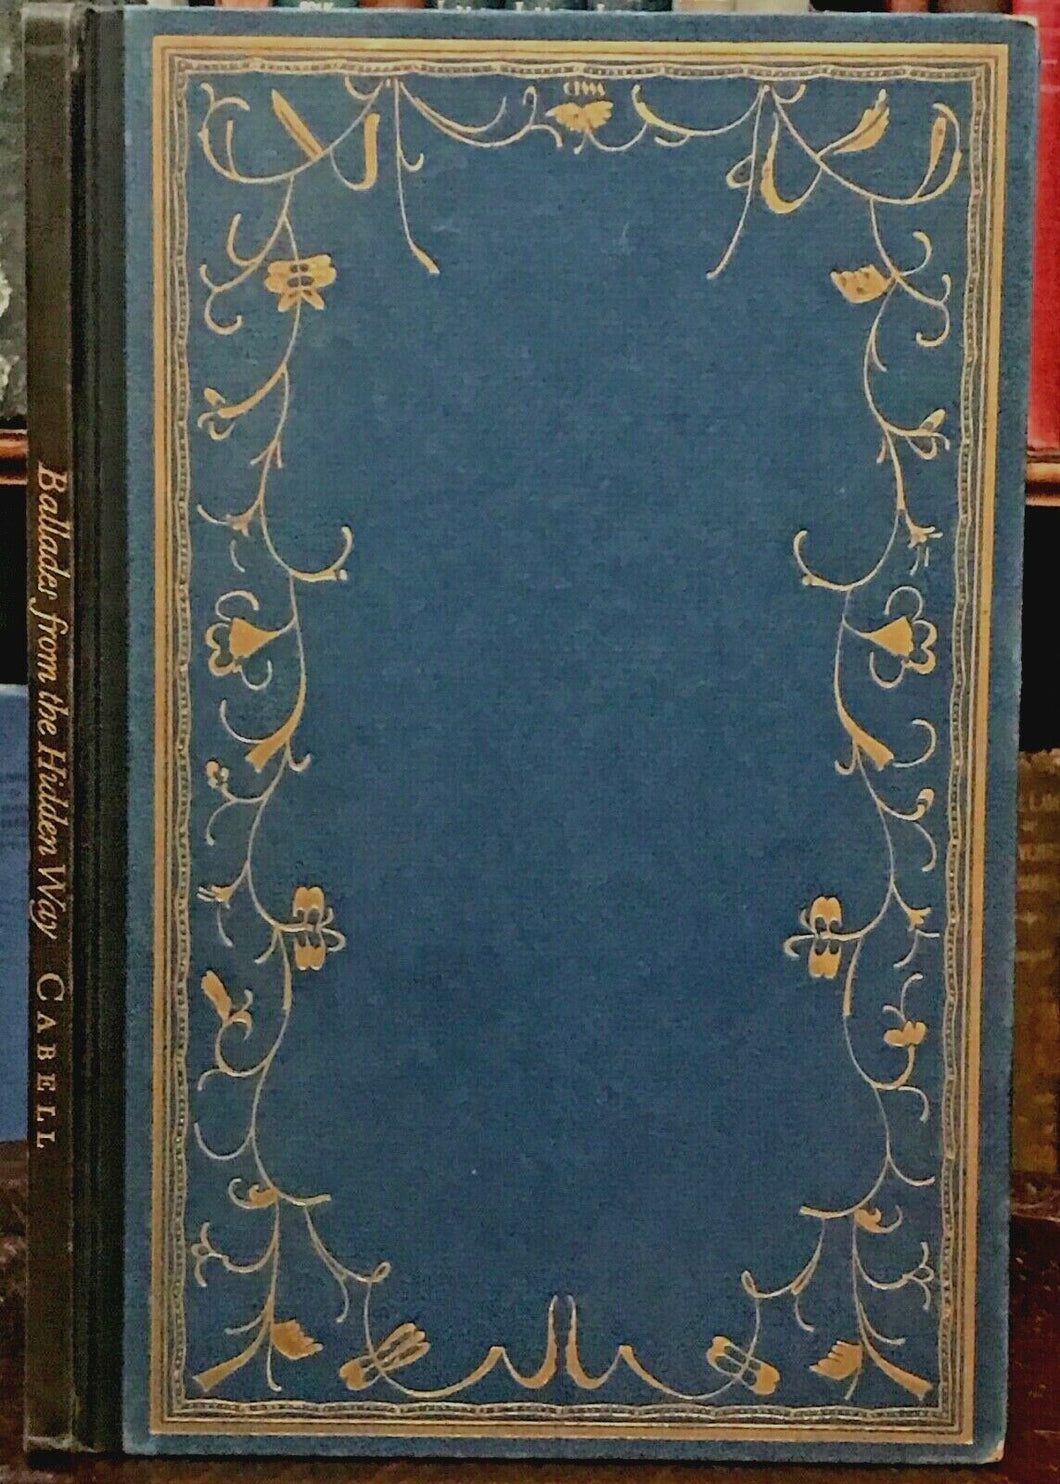 BALLADES FROM THE HIDDEN WAY - Cabell, 1st/ Ltd Ed 198/830, 1928 - SIGNED POETRY